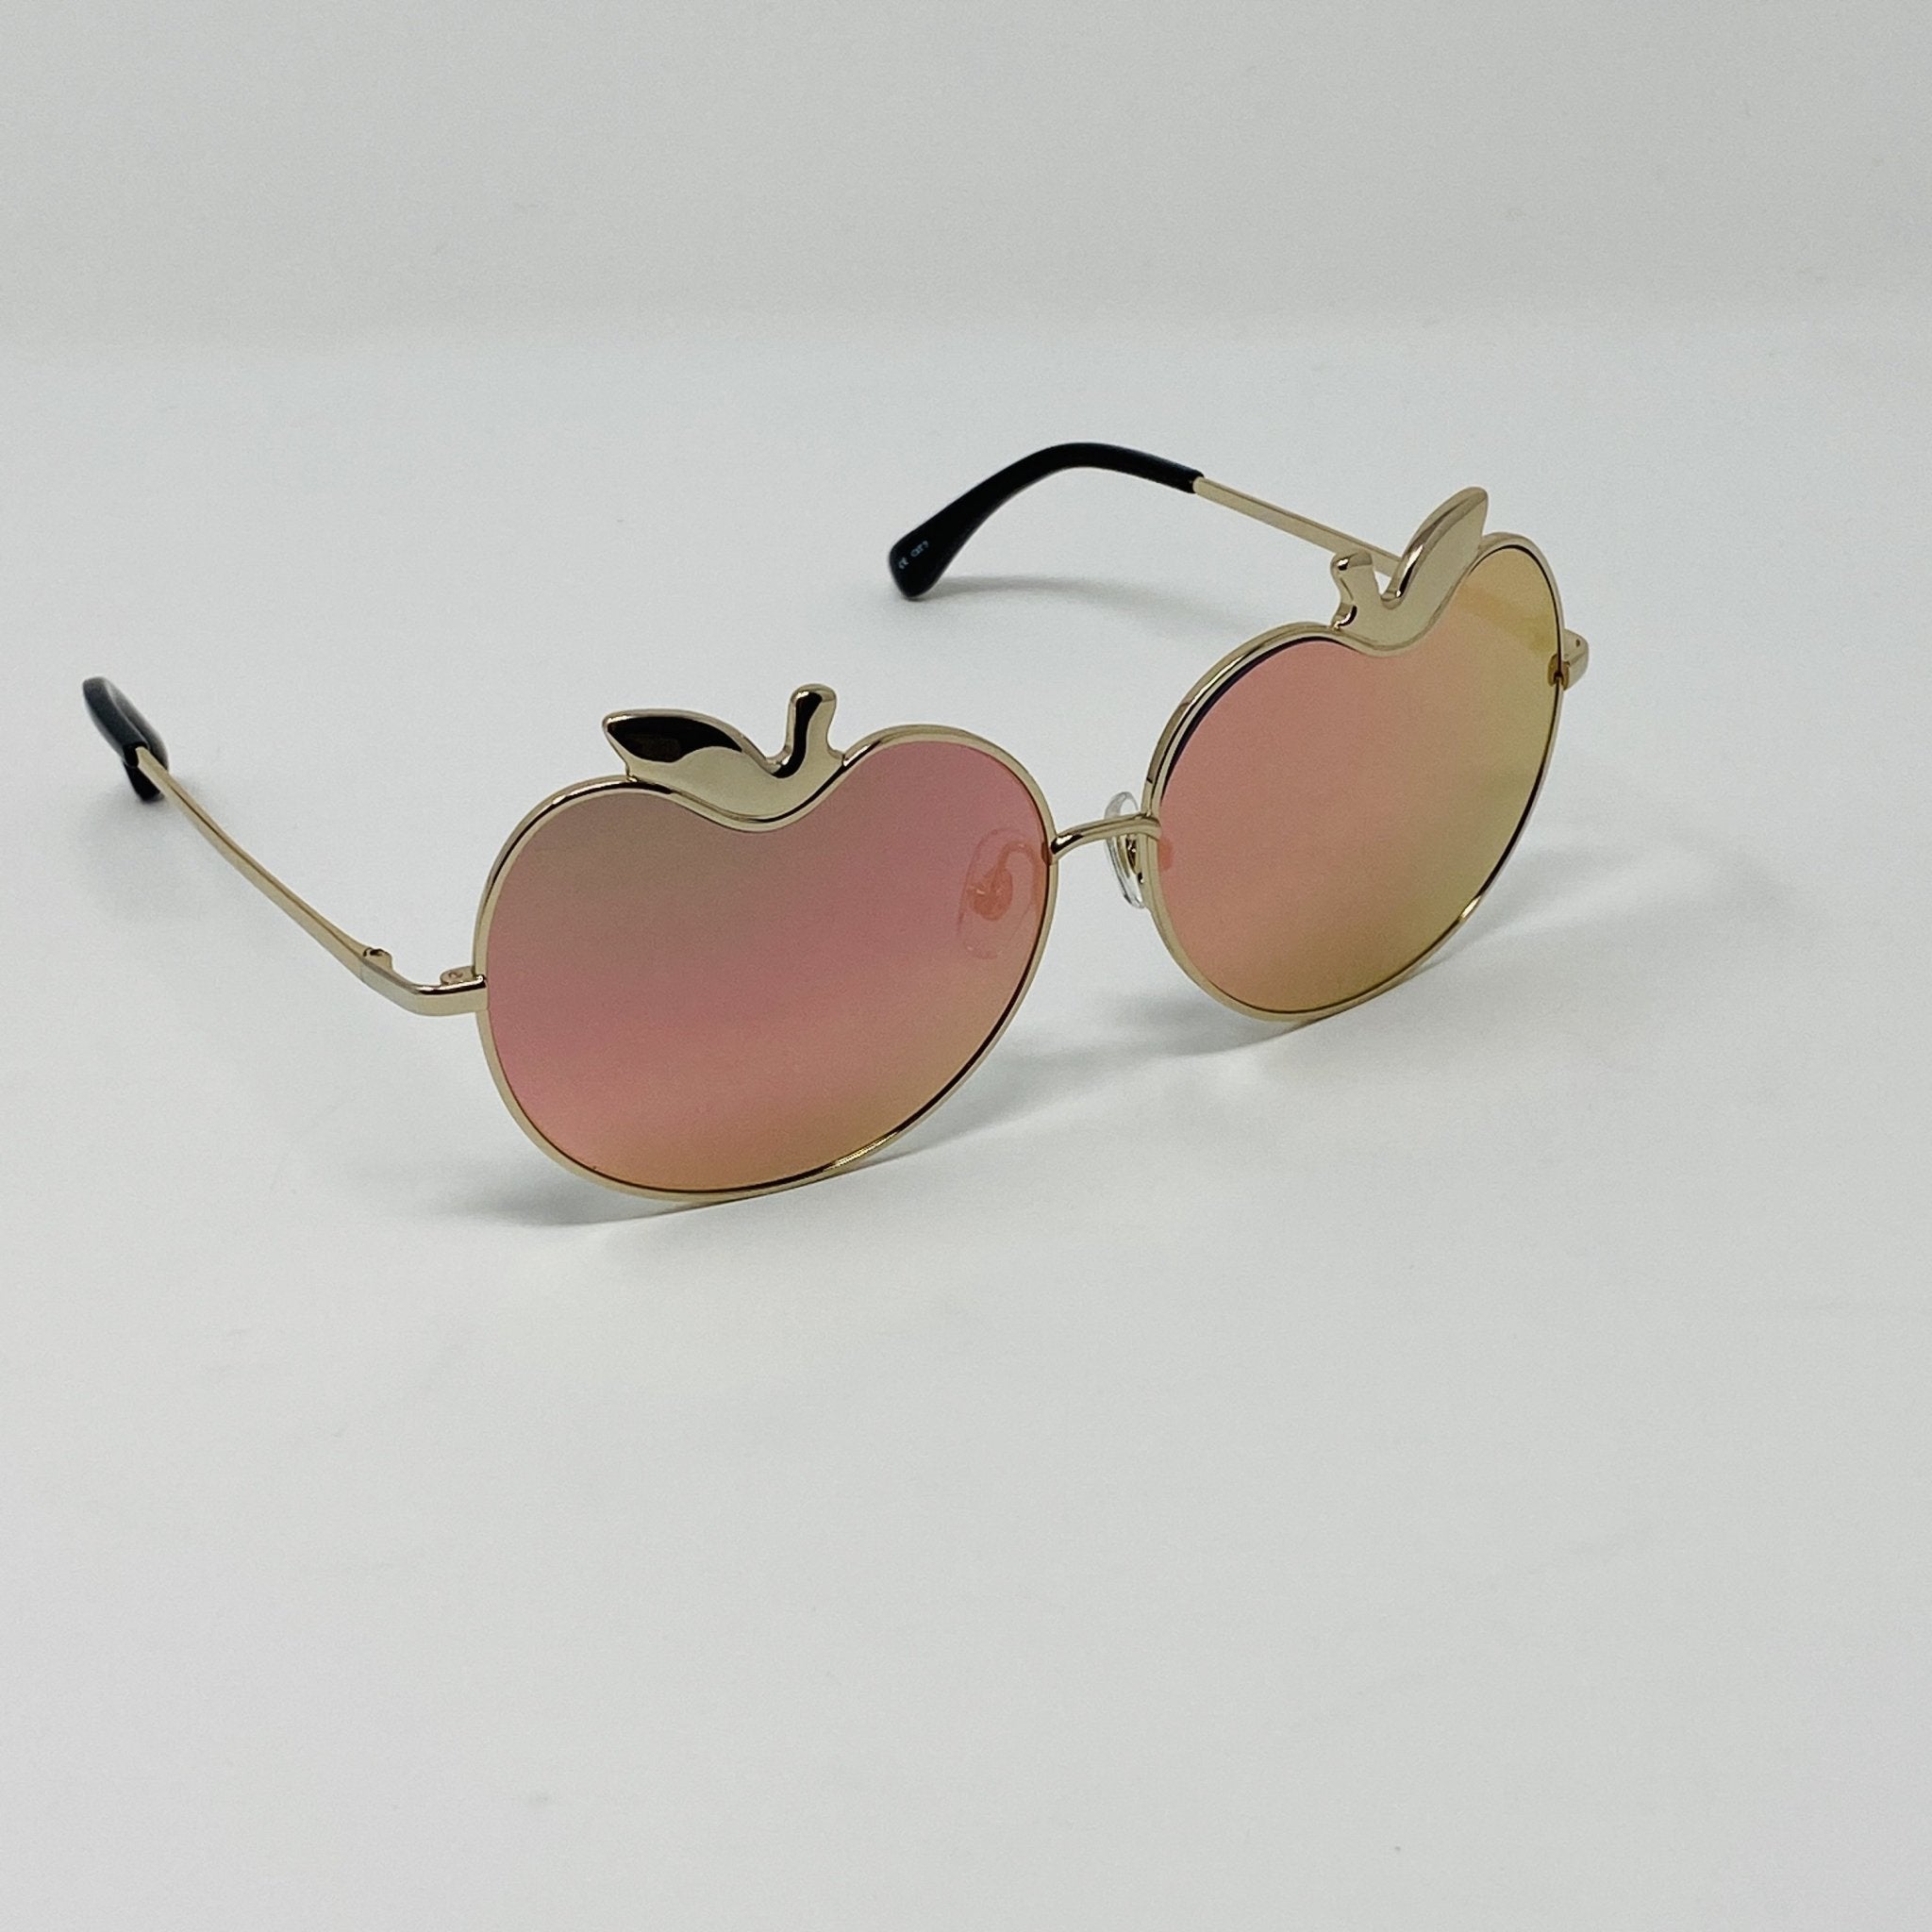 Markus Lupfer Sunglasses Special Apples Gold Mirror Lenses Category 3 Dark Tint ML12C7SUN - Watches & Crystals